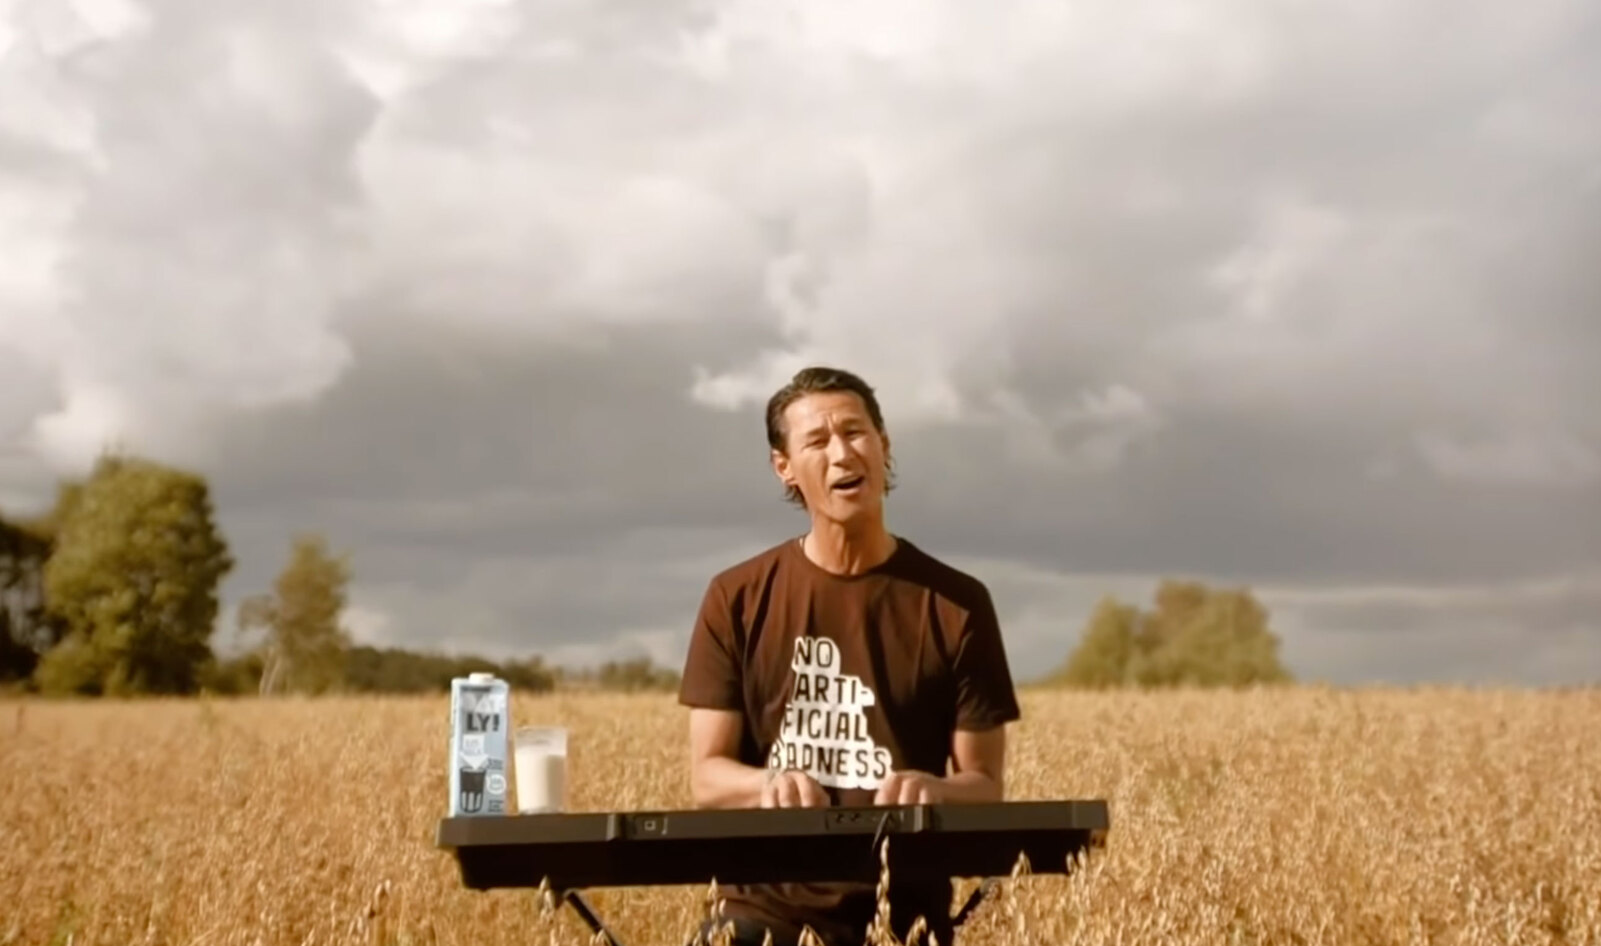 That Weird Oatly Super Bowl Commercial Was Actually Pretty Great